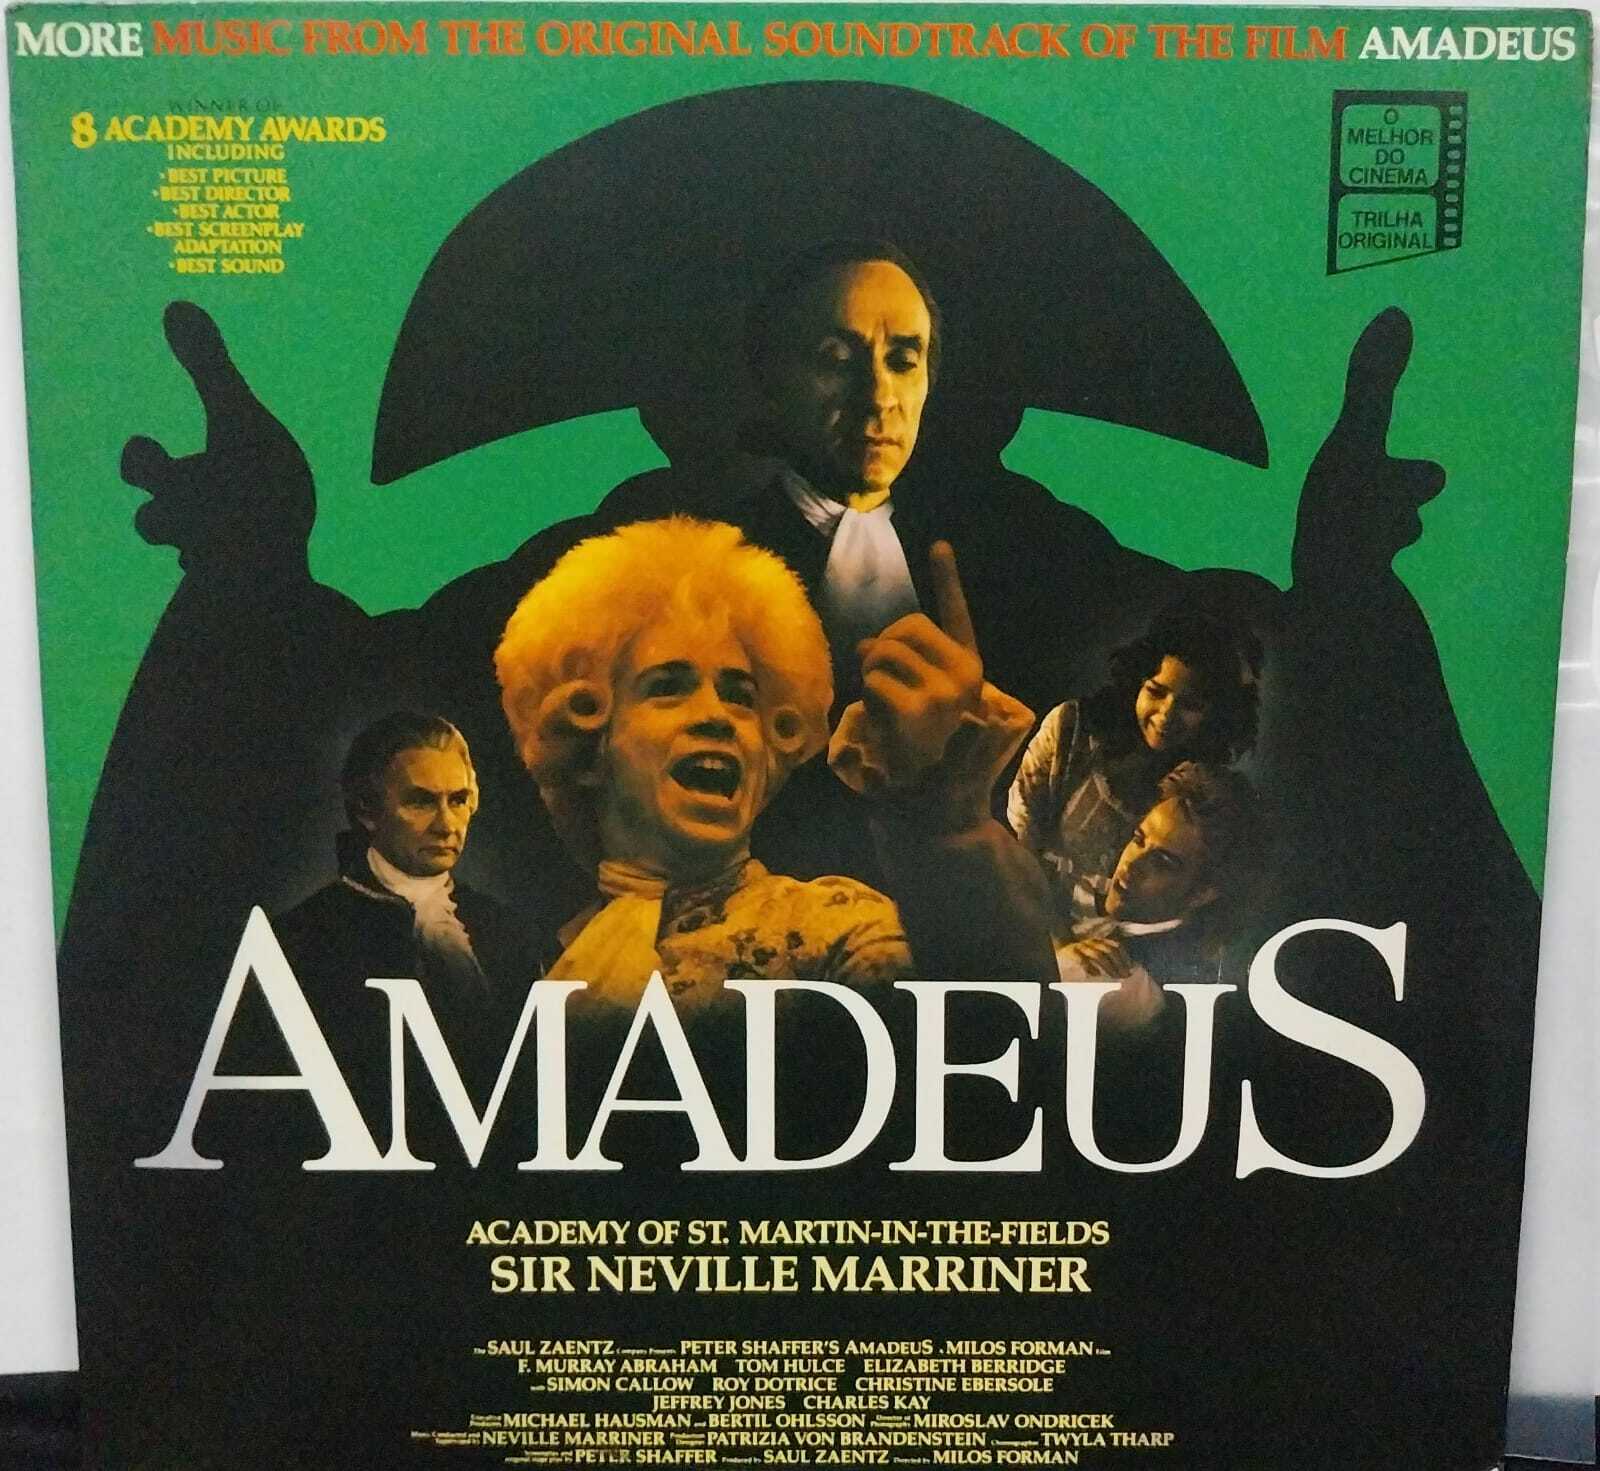 Vinil -  Amadeus - More Music From The Original Soundtrack Of The Film